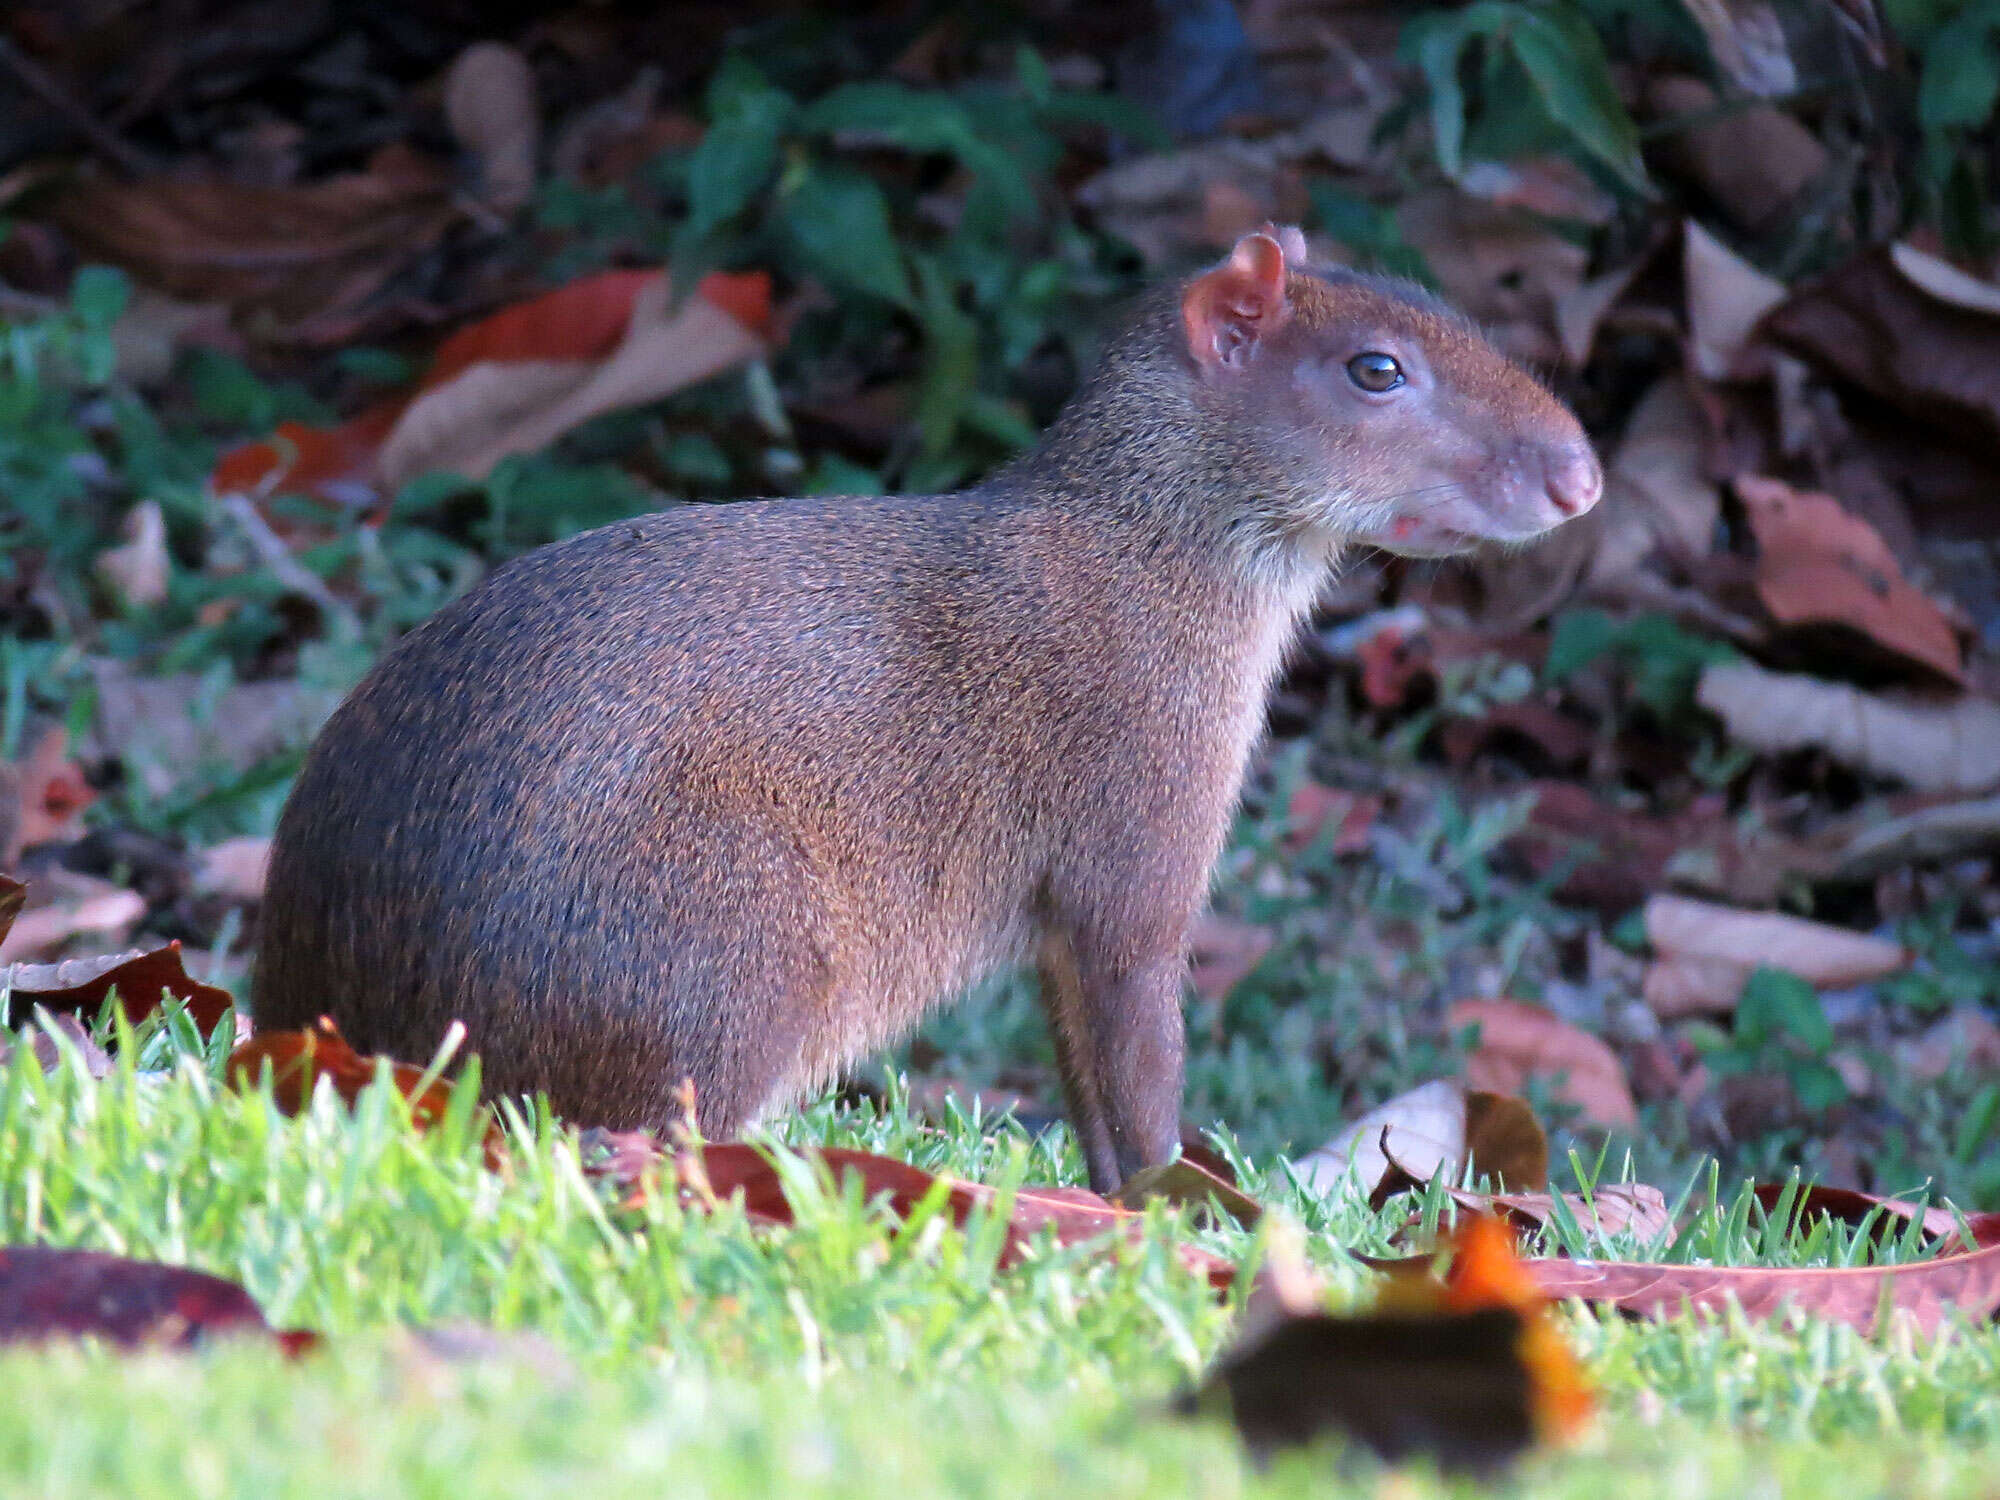 Image of Central American Agouti